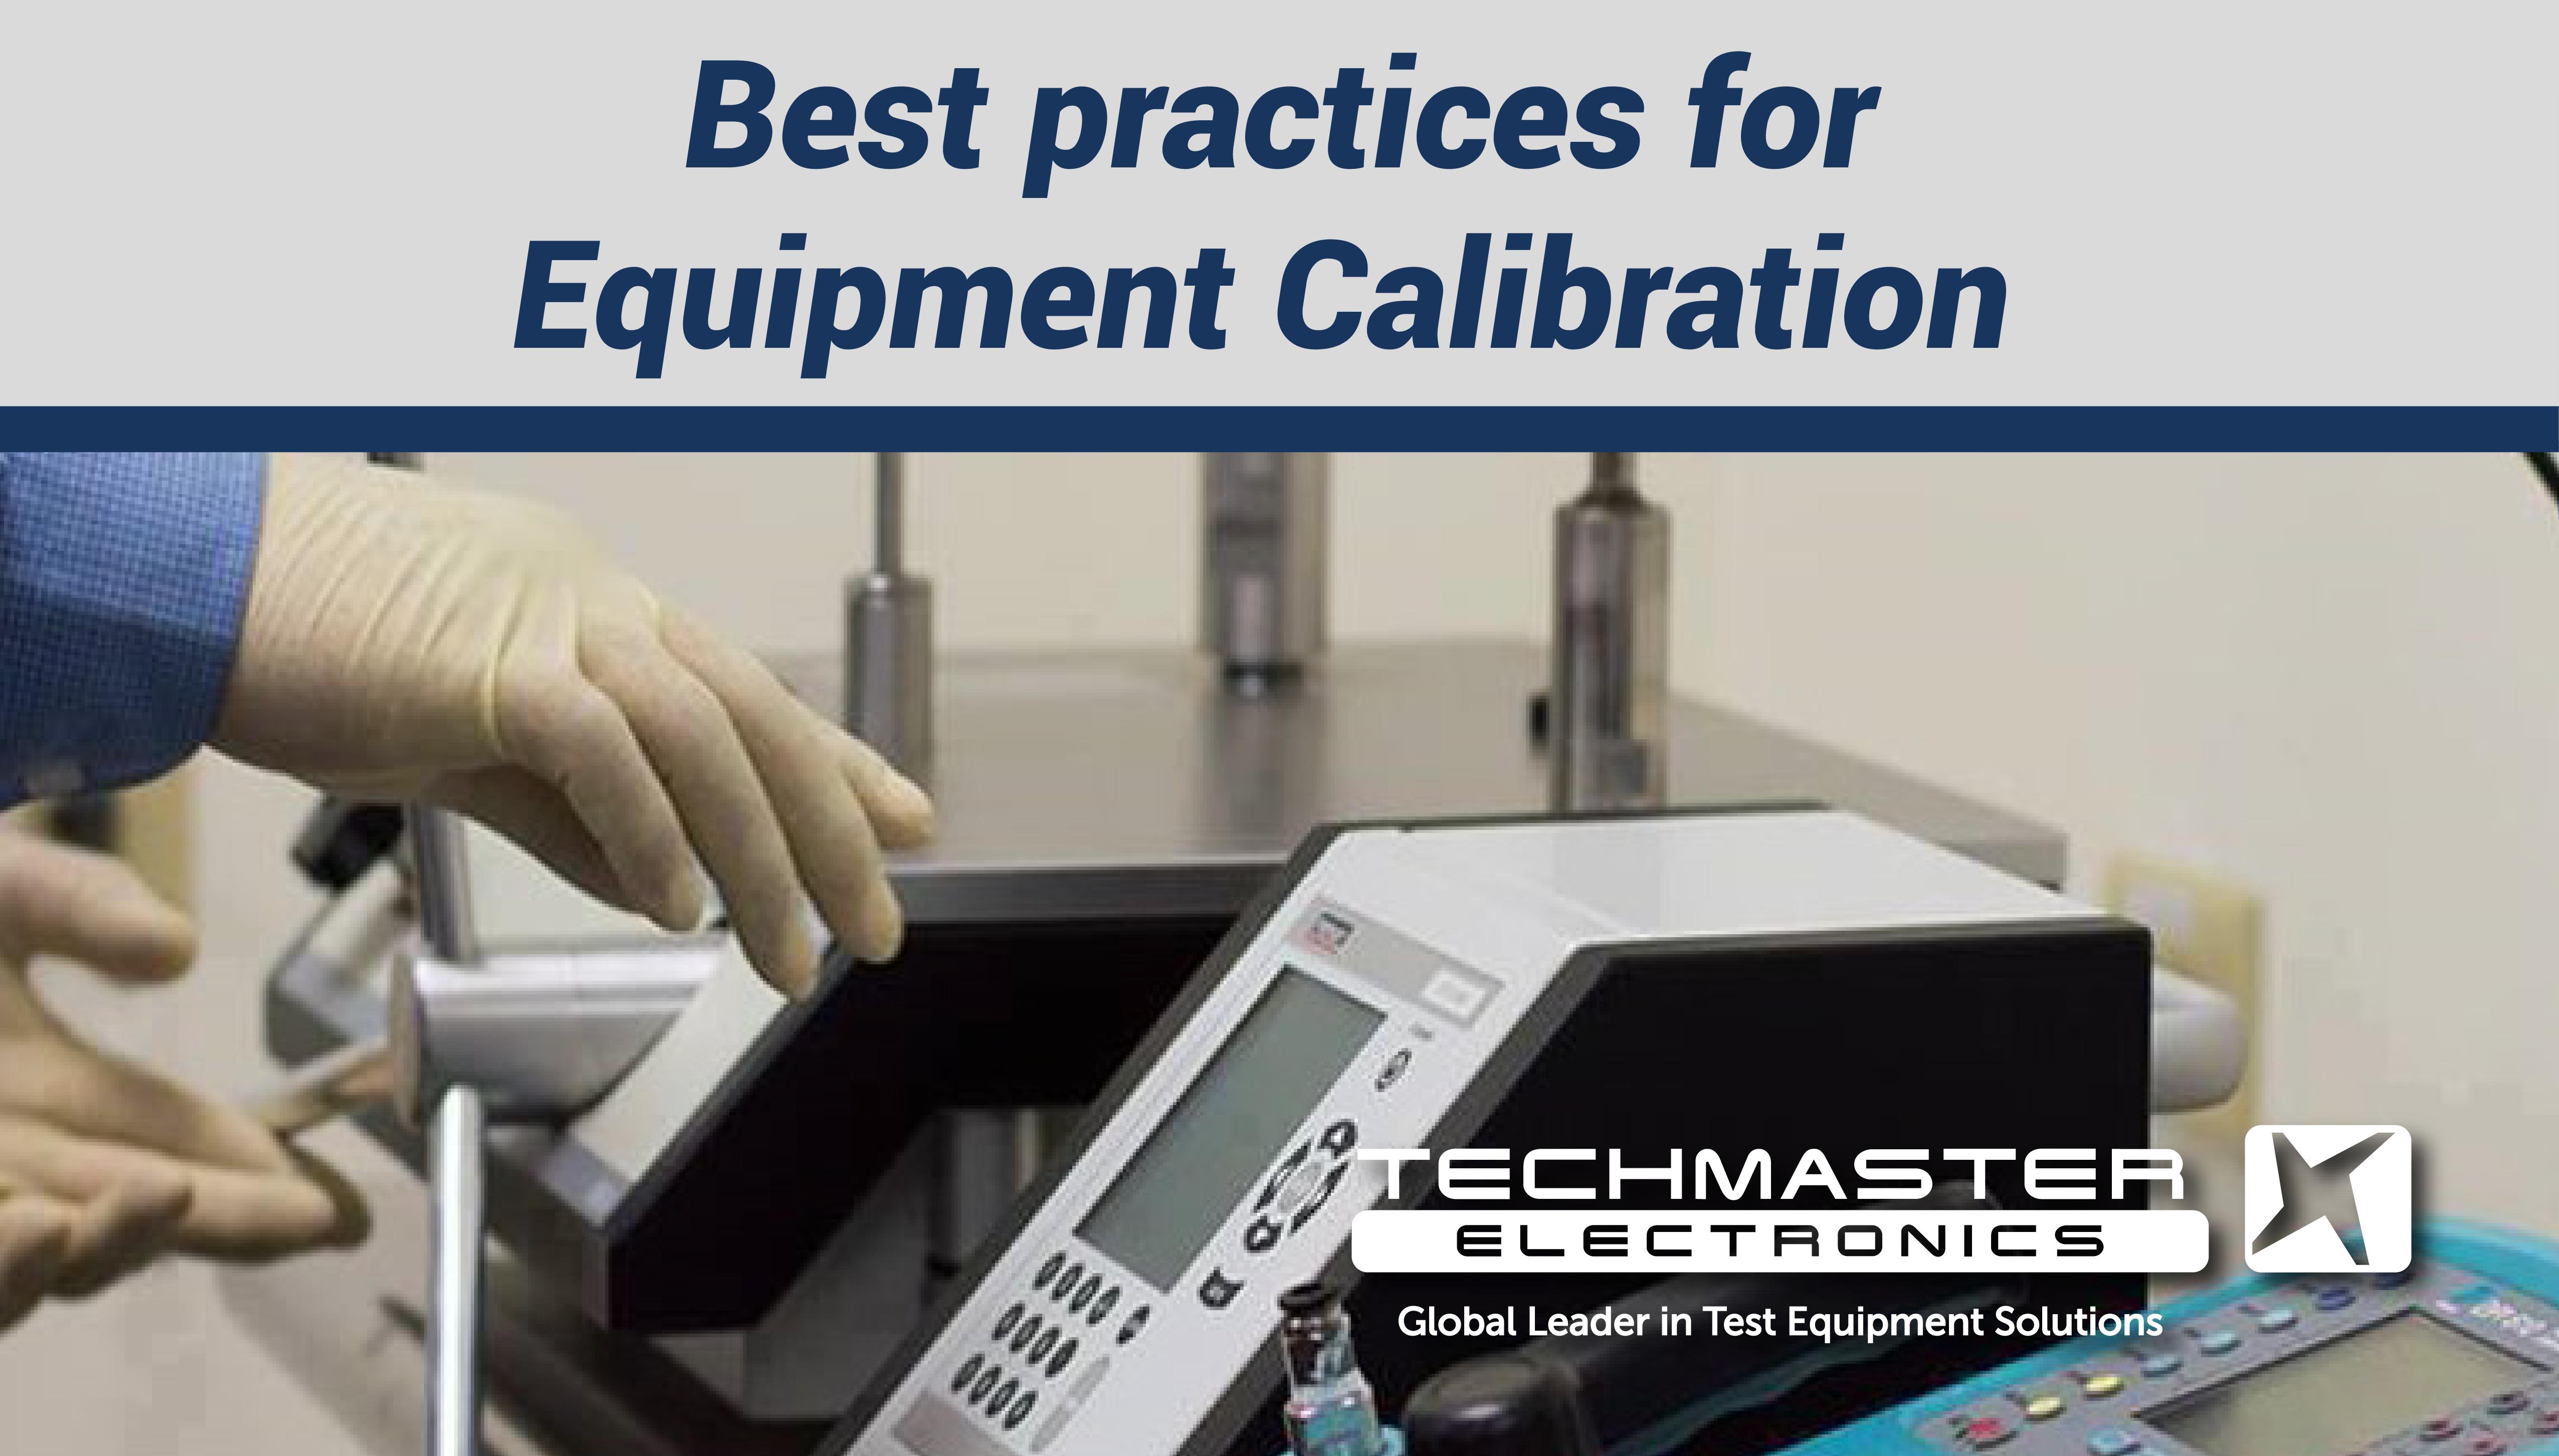 Best practices for Equipment Calibration